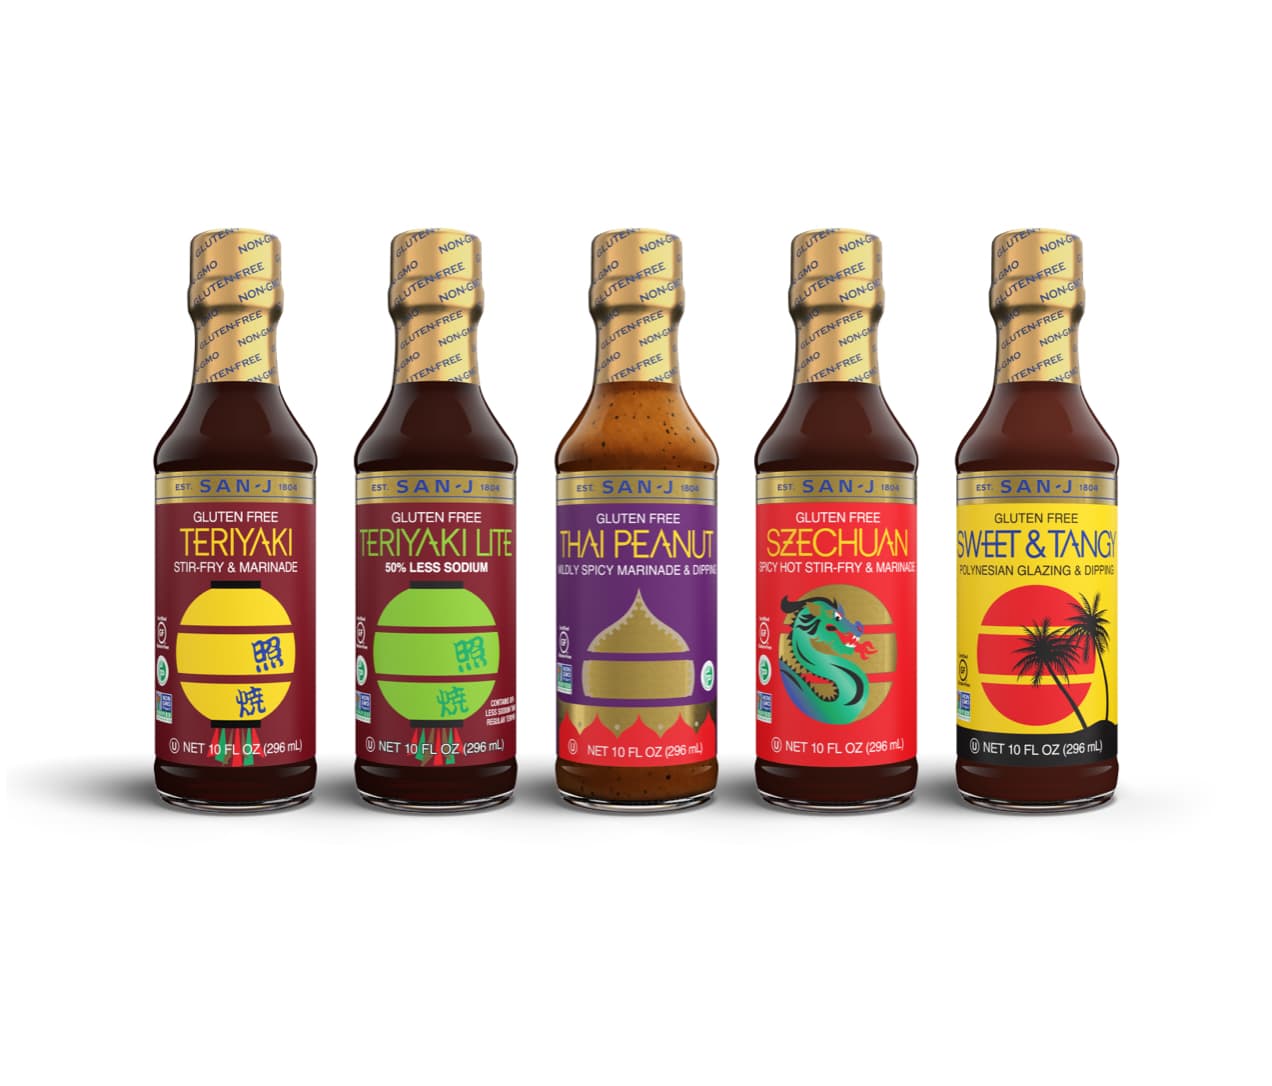 A line of San-J Gluten Free Asian Cooking Soy Sauce